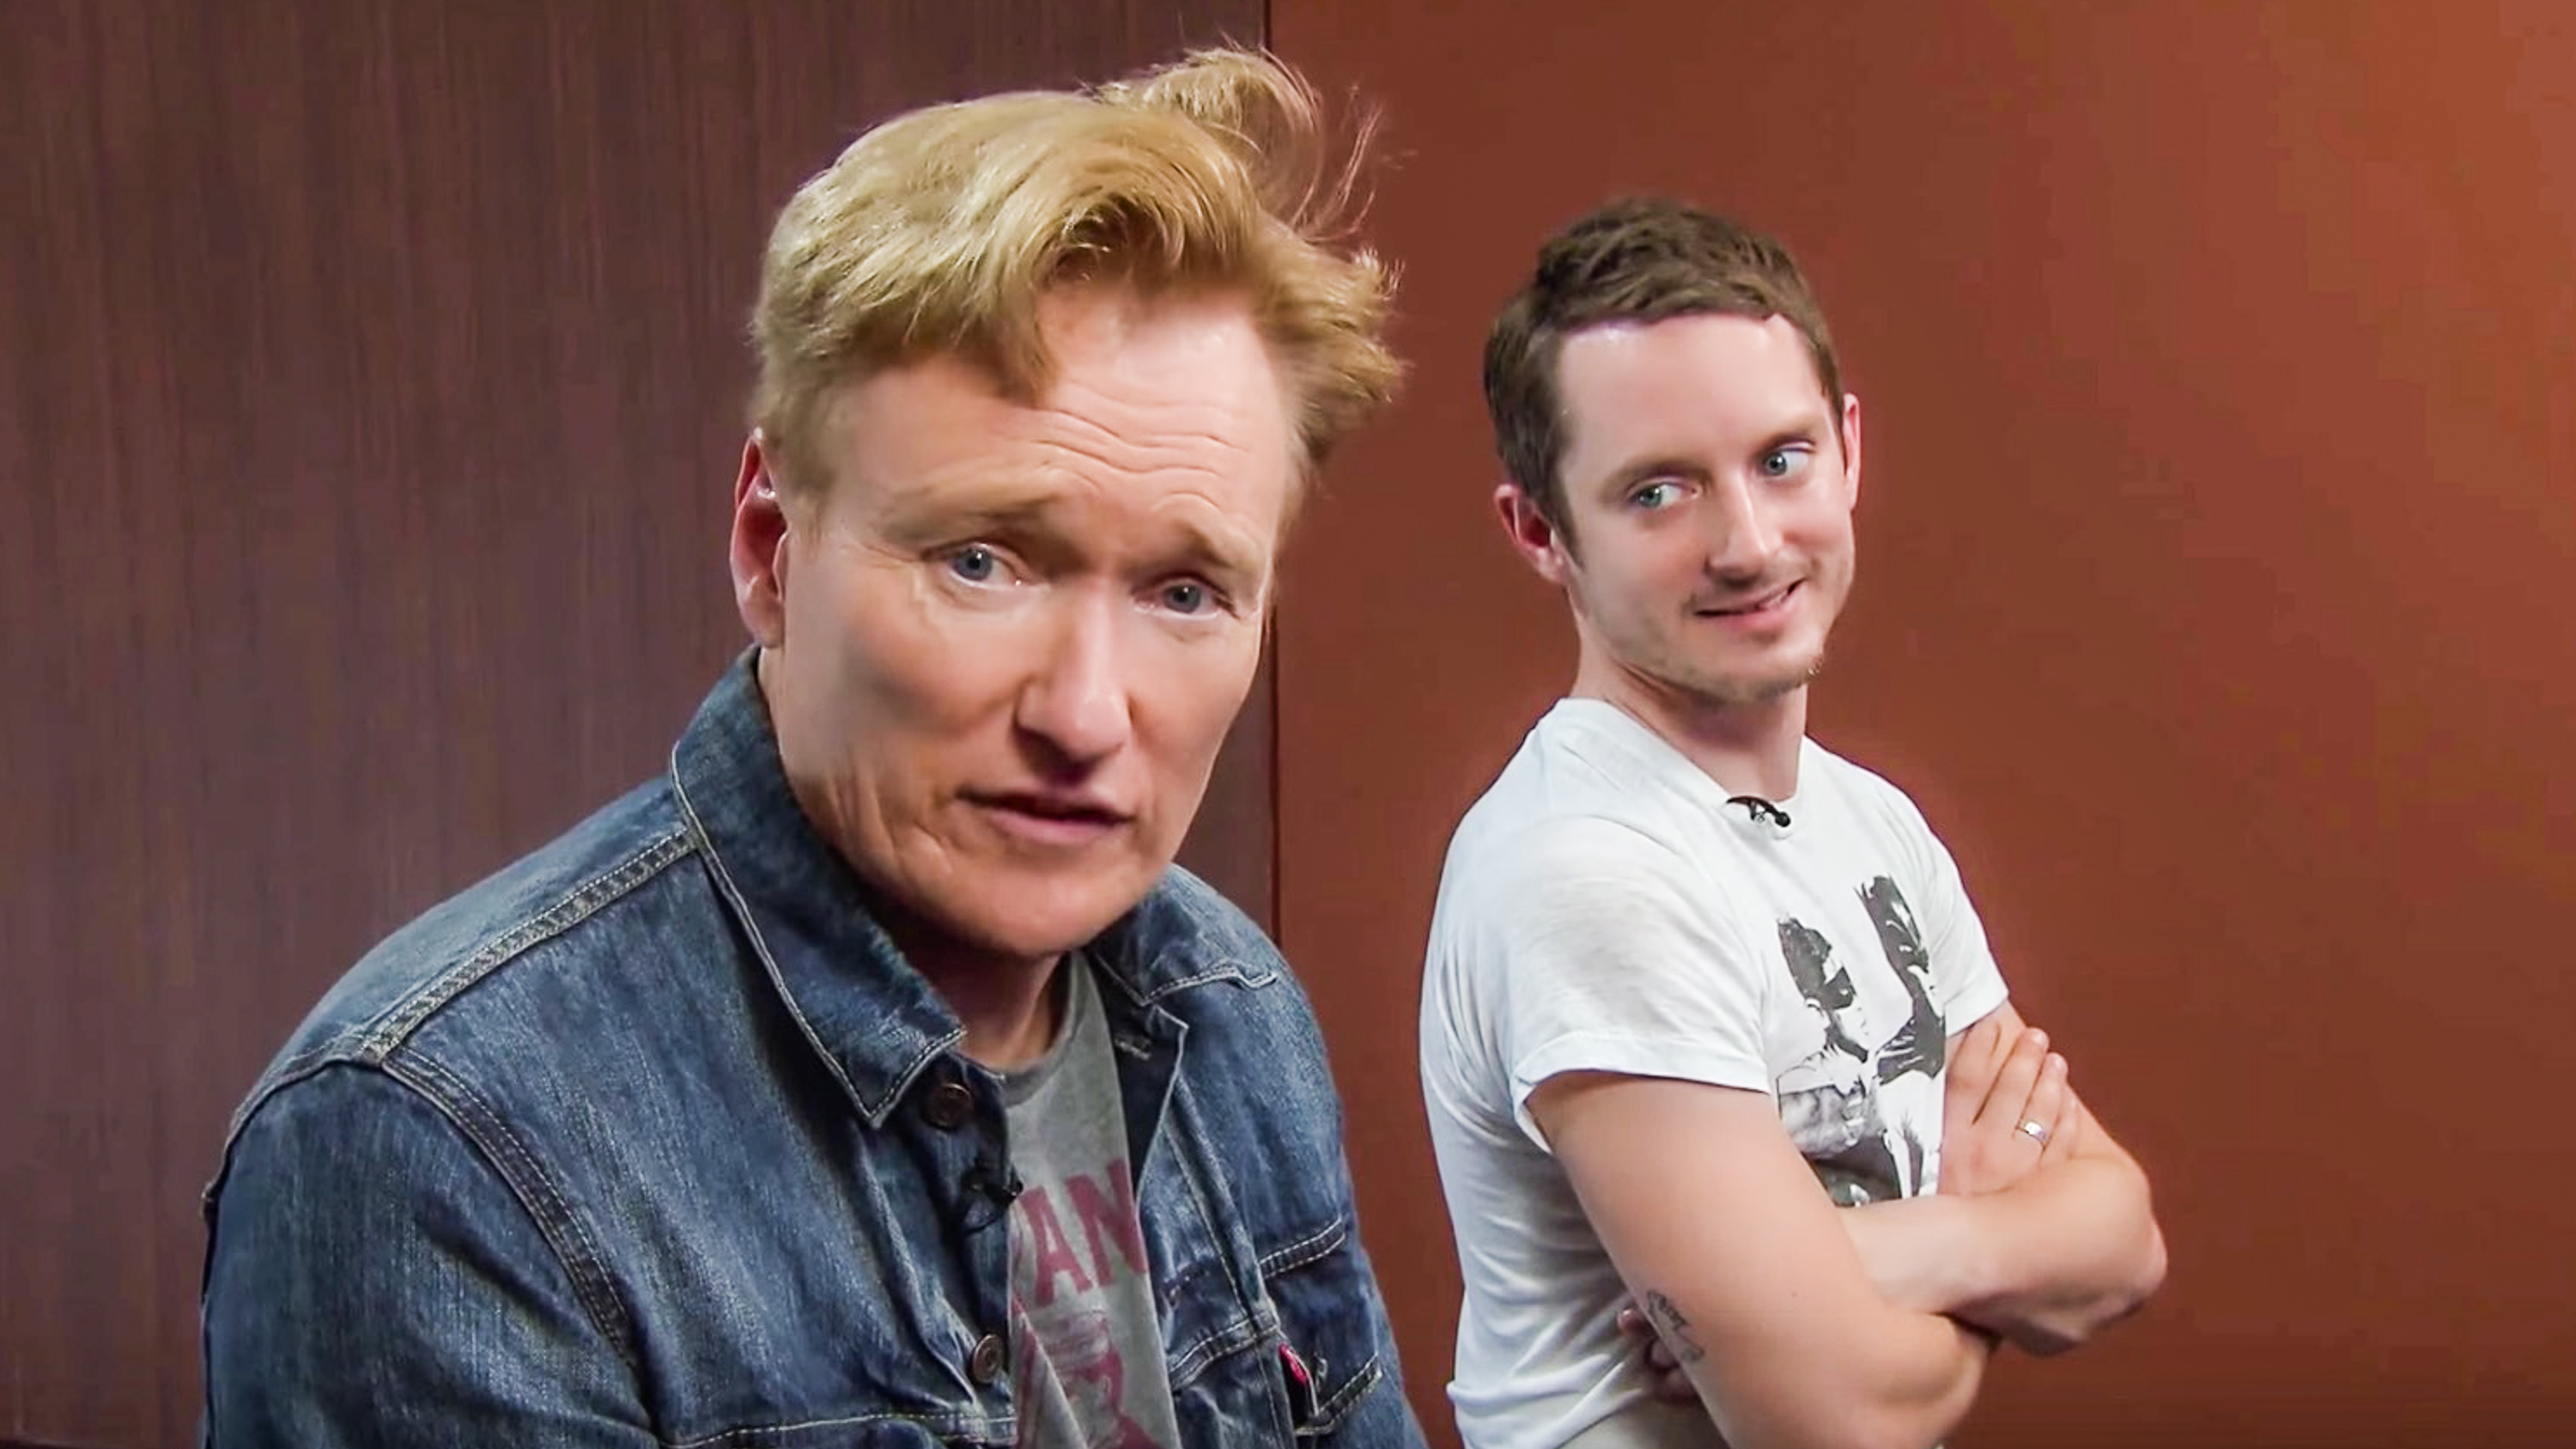 'CLUELESS GAMER.' Conan O'Brien and Elijah Wood try out 'Final Fantasy XV' before it drops. Screengrab from YouTube/Team Coco 